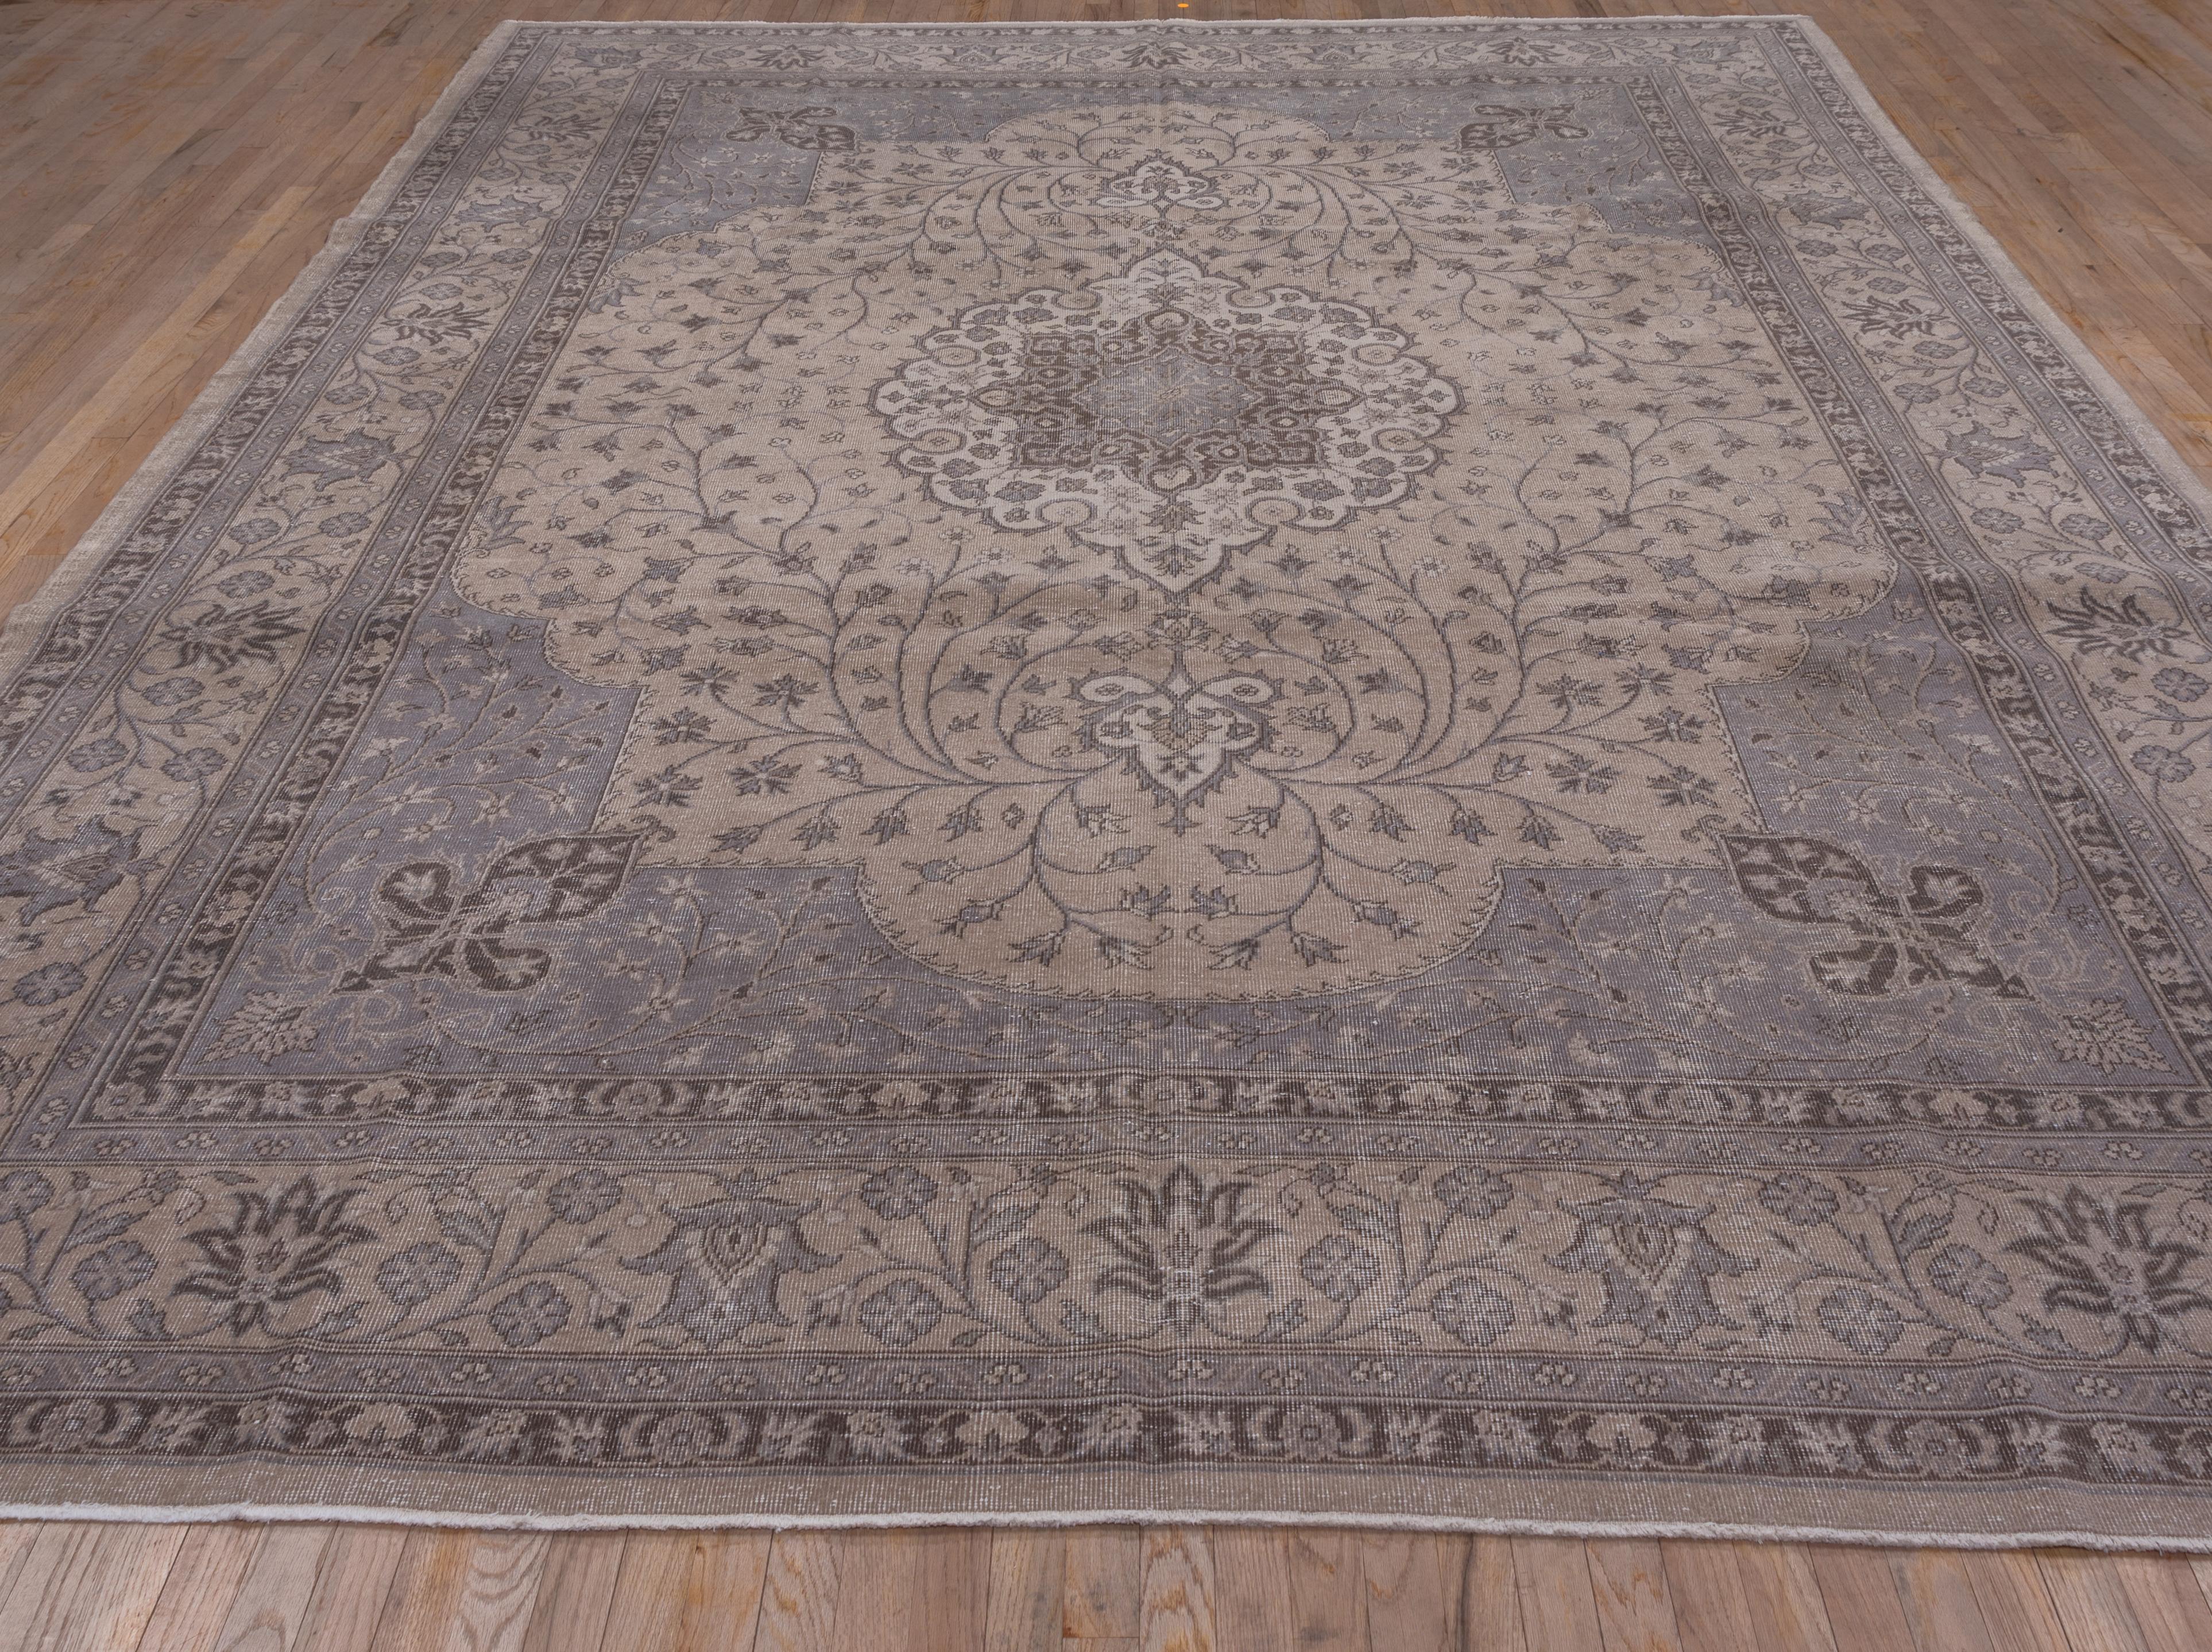 Antique Turkish Sivas Rug, Light Brown Field, Lavender and Gray Outer Field In Good Condition For Sale In New York, NY